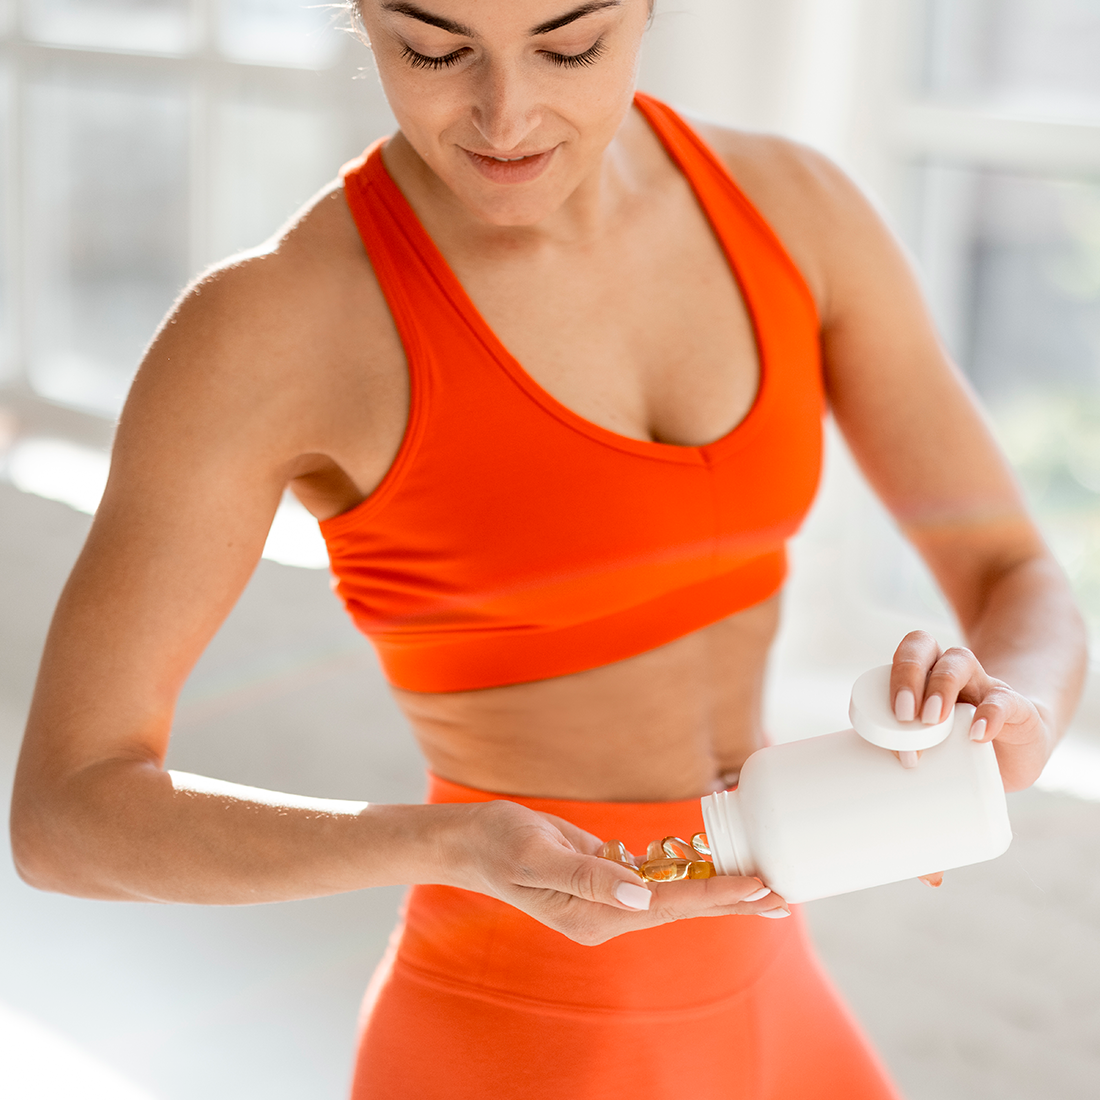 A fit woman in an orange sports bra and leggings pouring supplements from a bottle into her hand. PRP Therapy Solutions